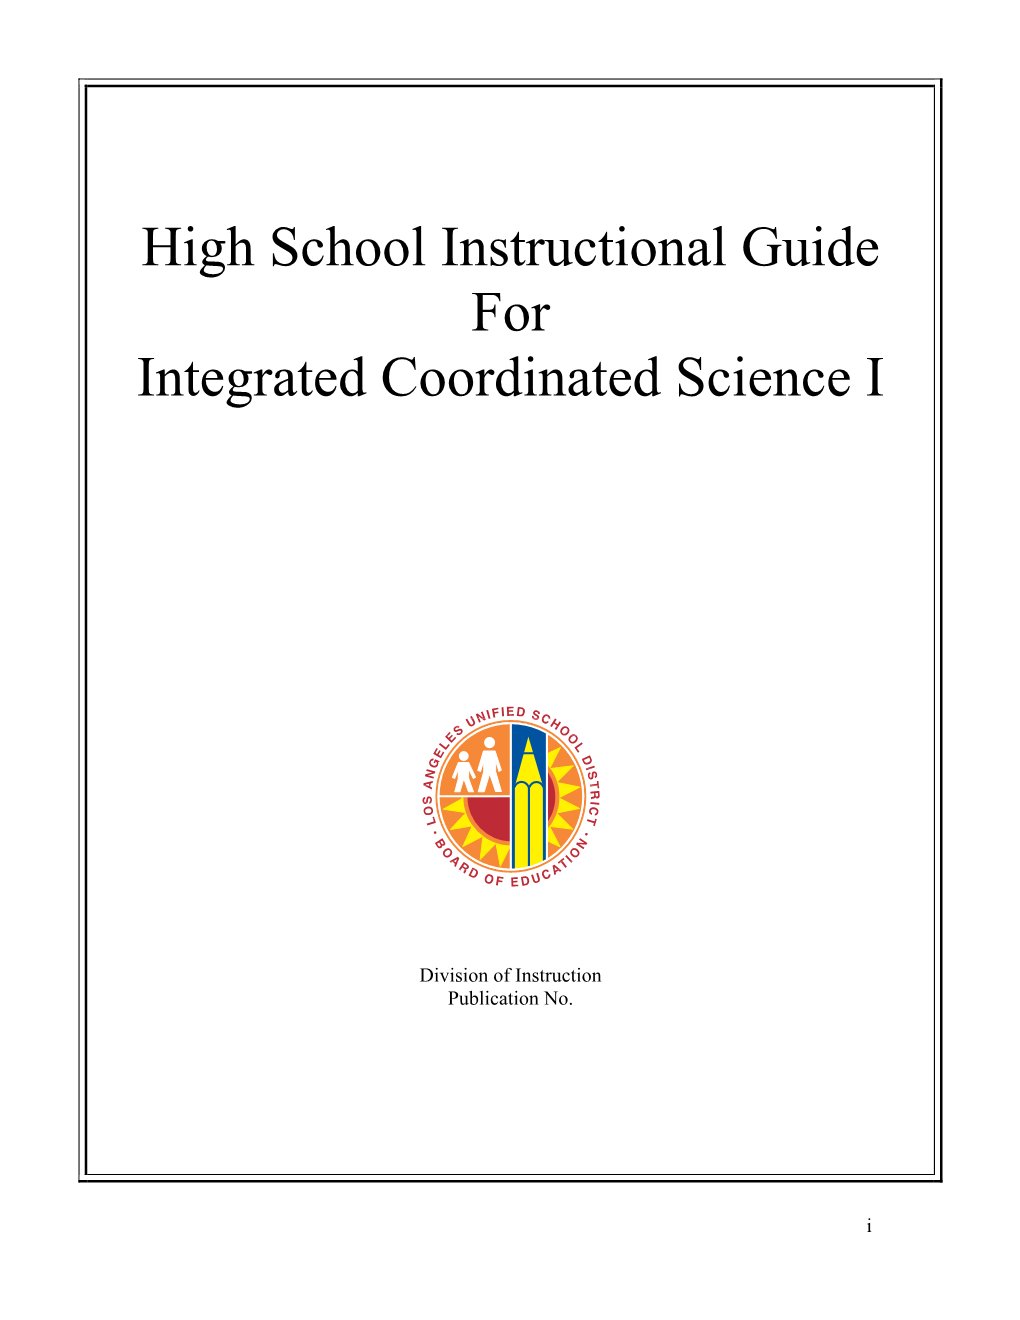 High School Instructional Guide for Integrated Coordinated Science I